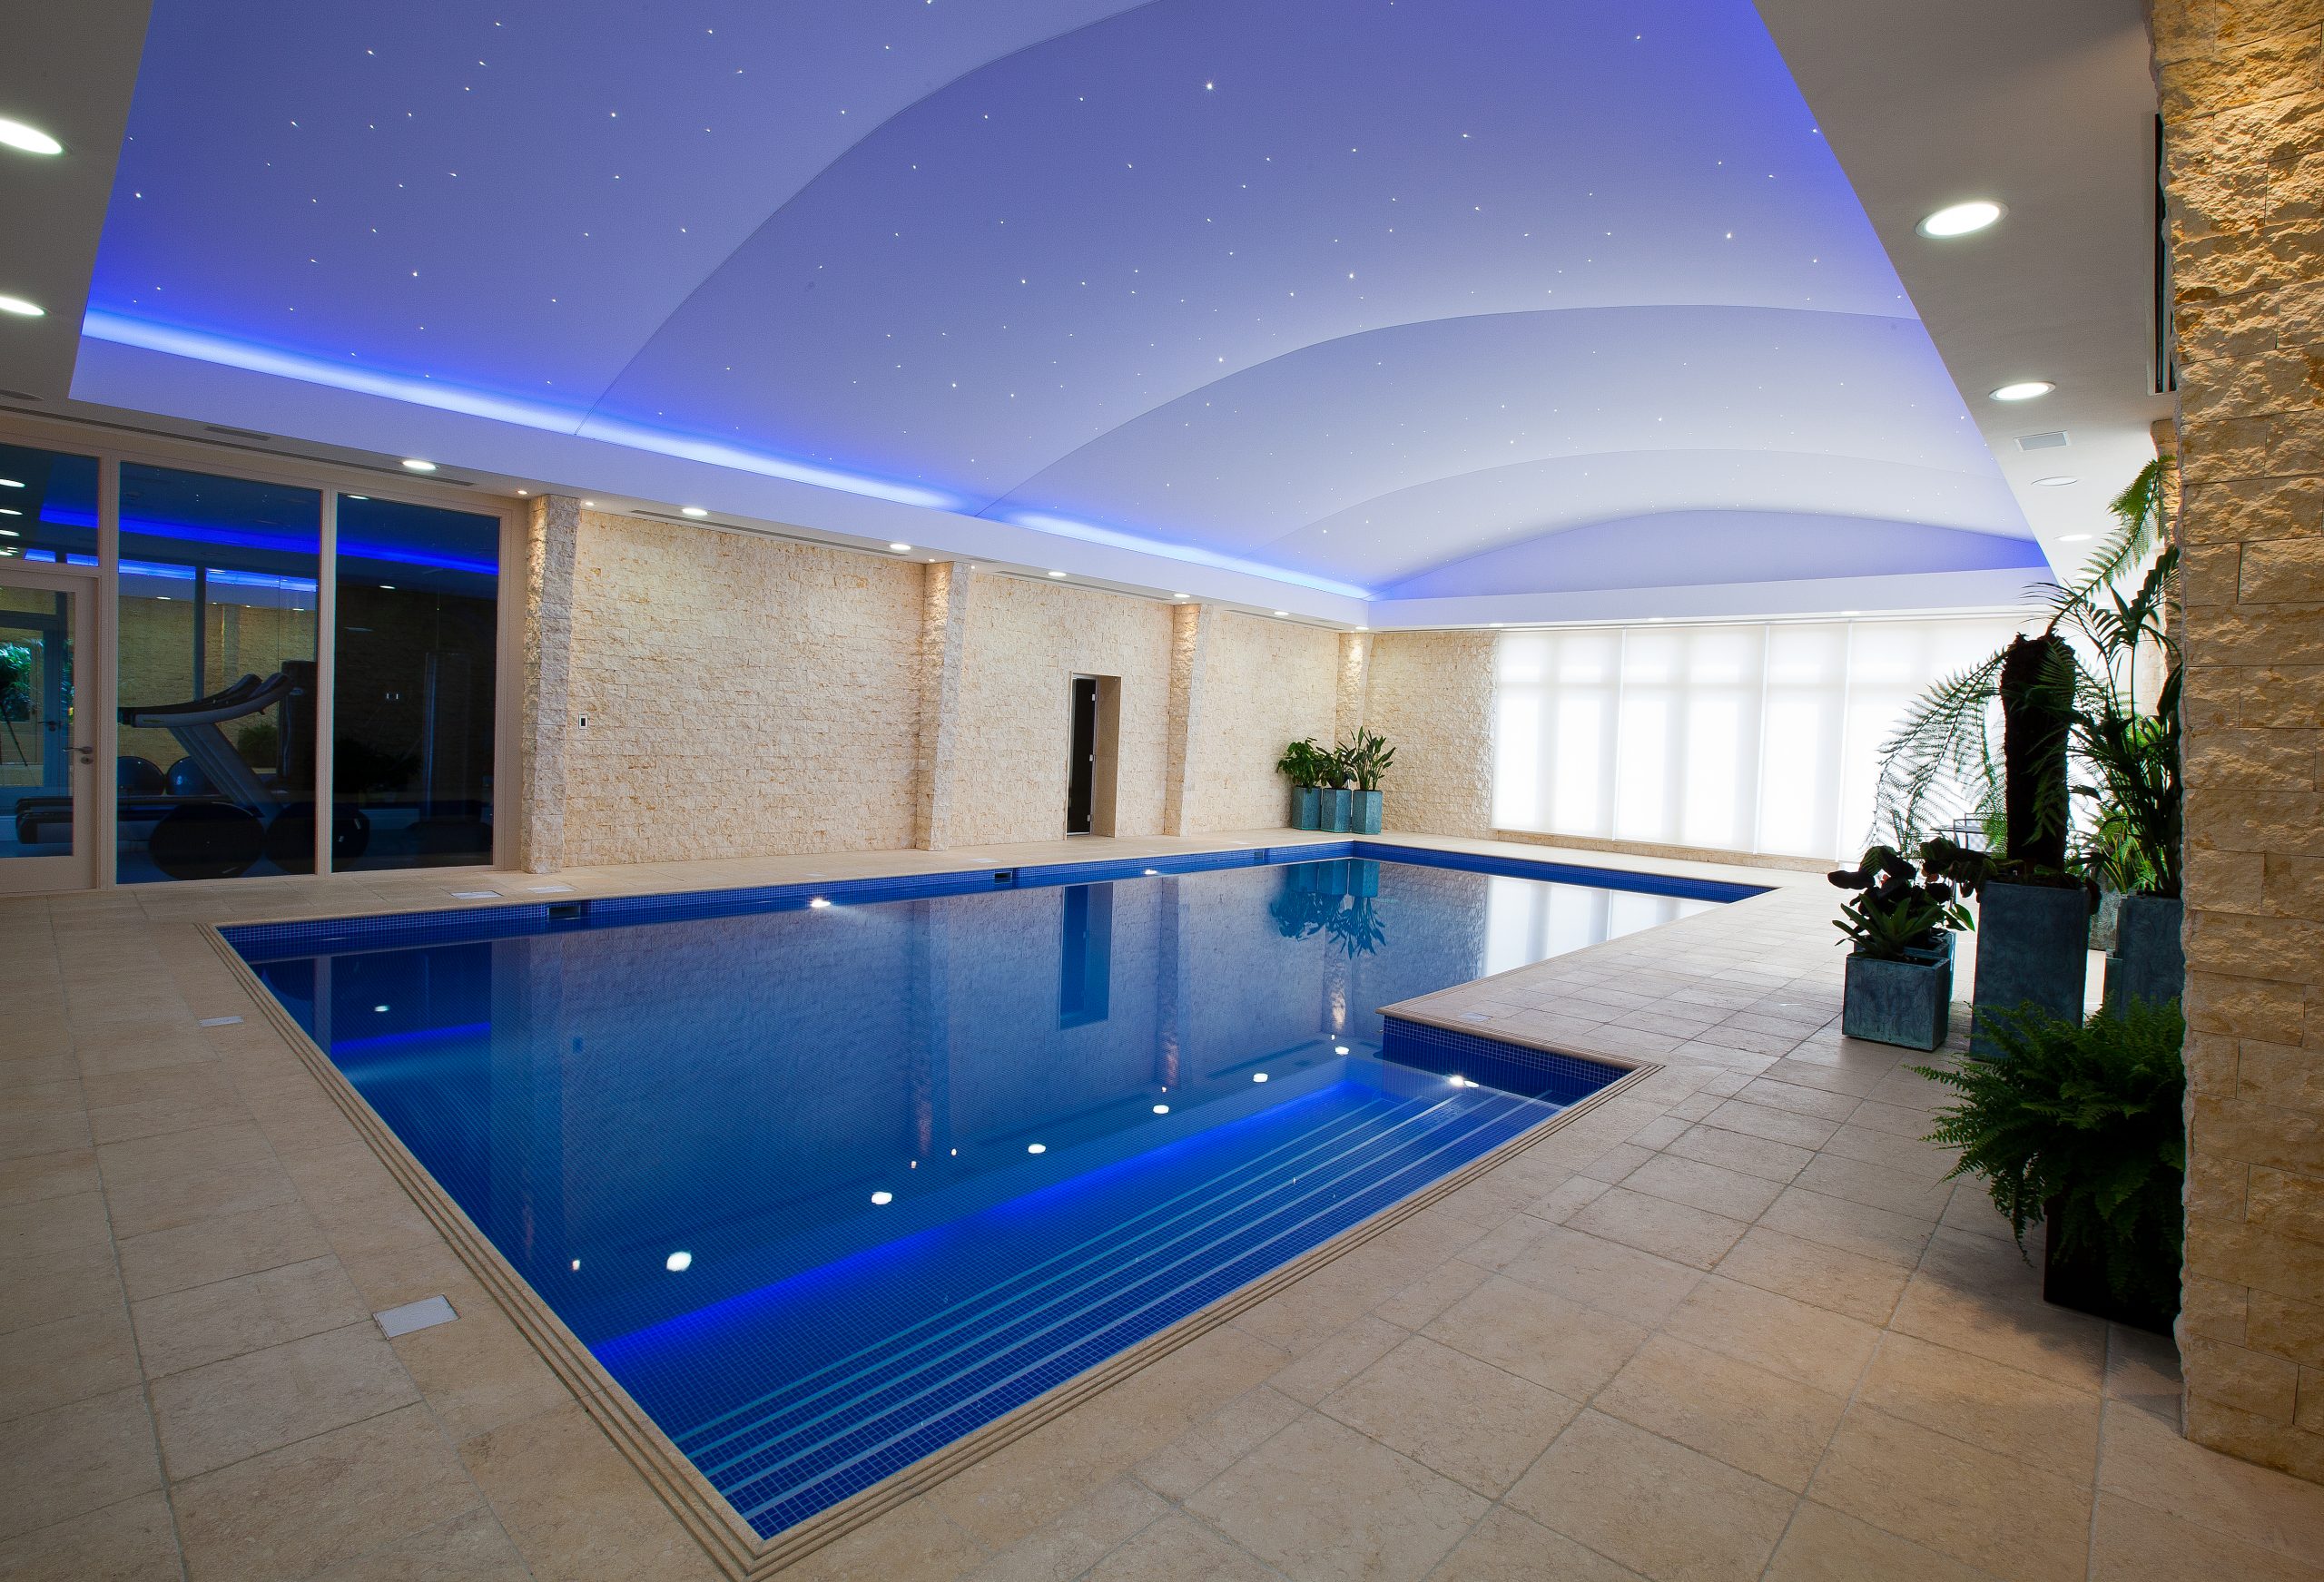 Pool with lighting control and audio video system.